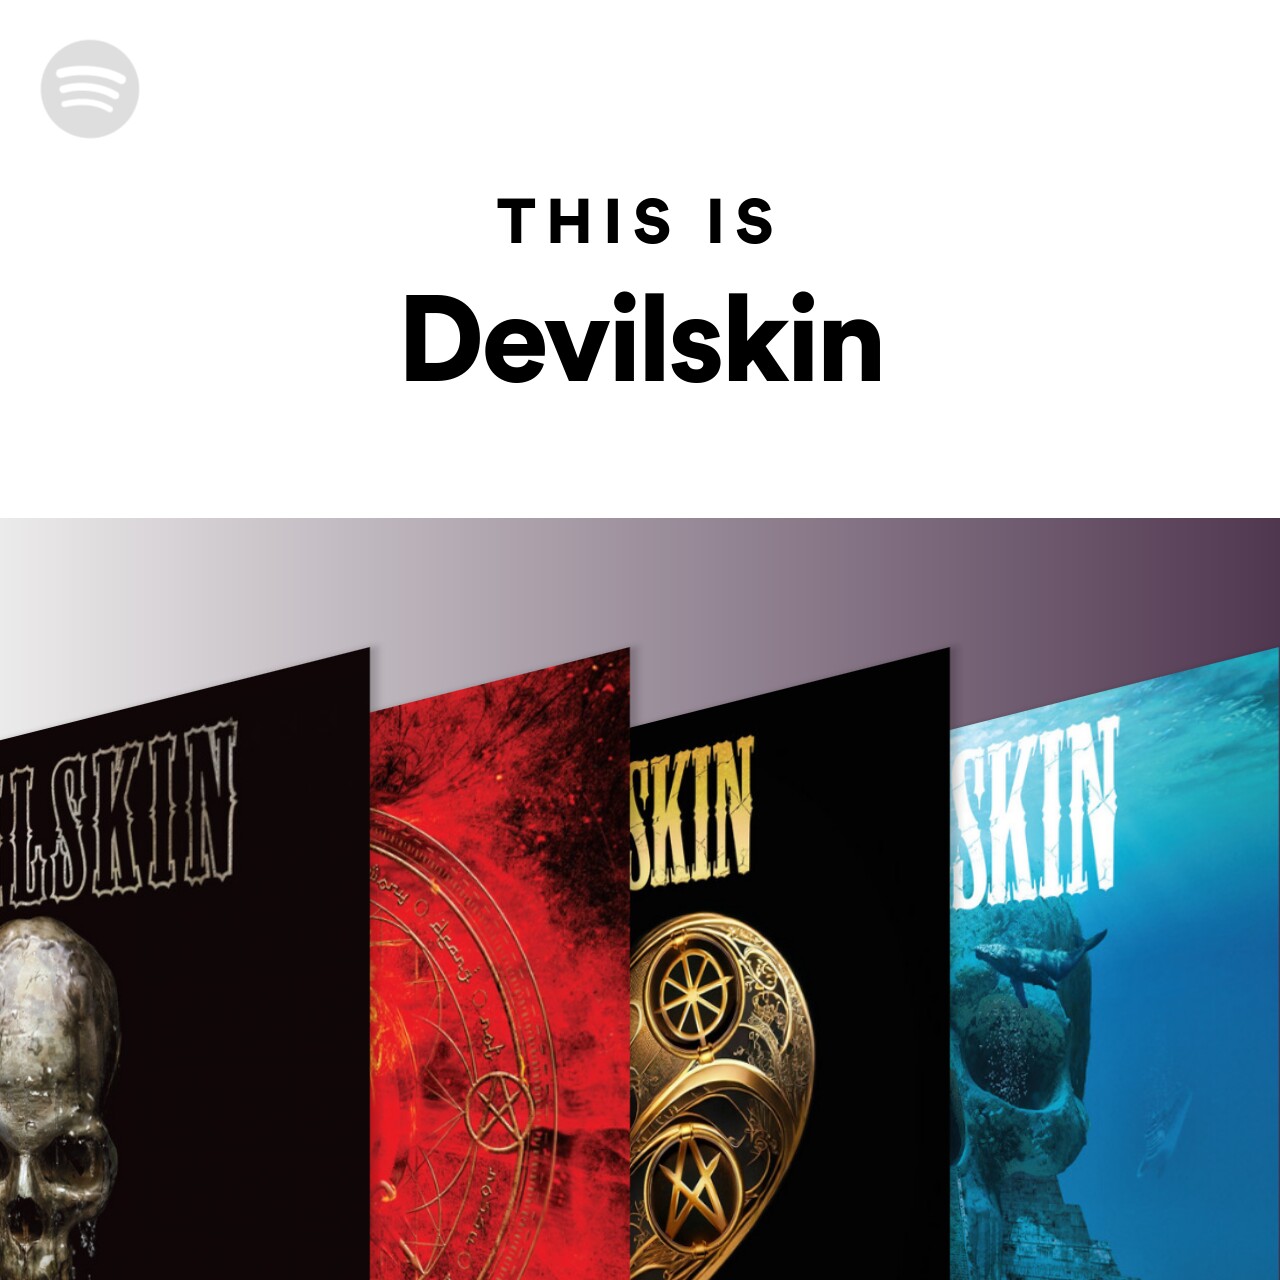 This Is Devilskin